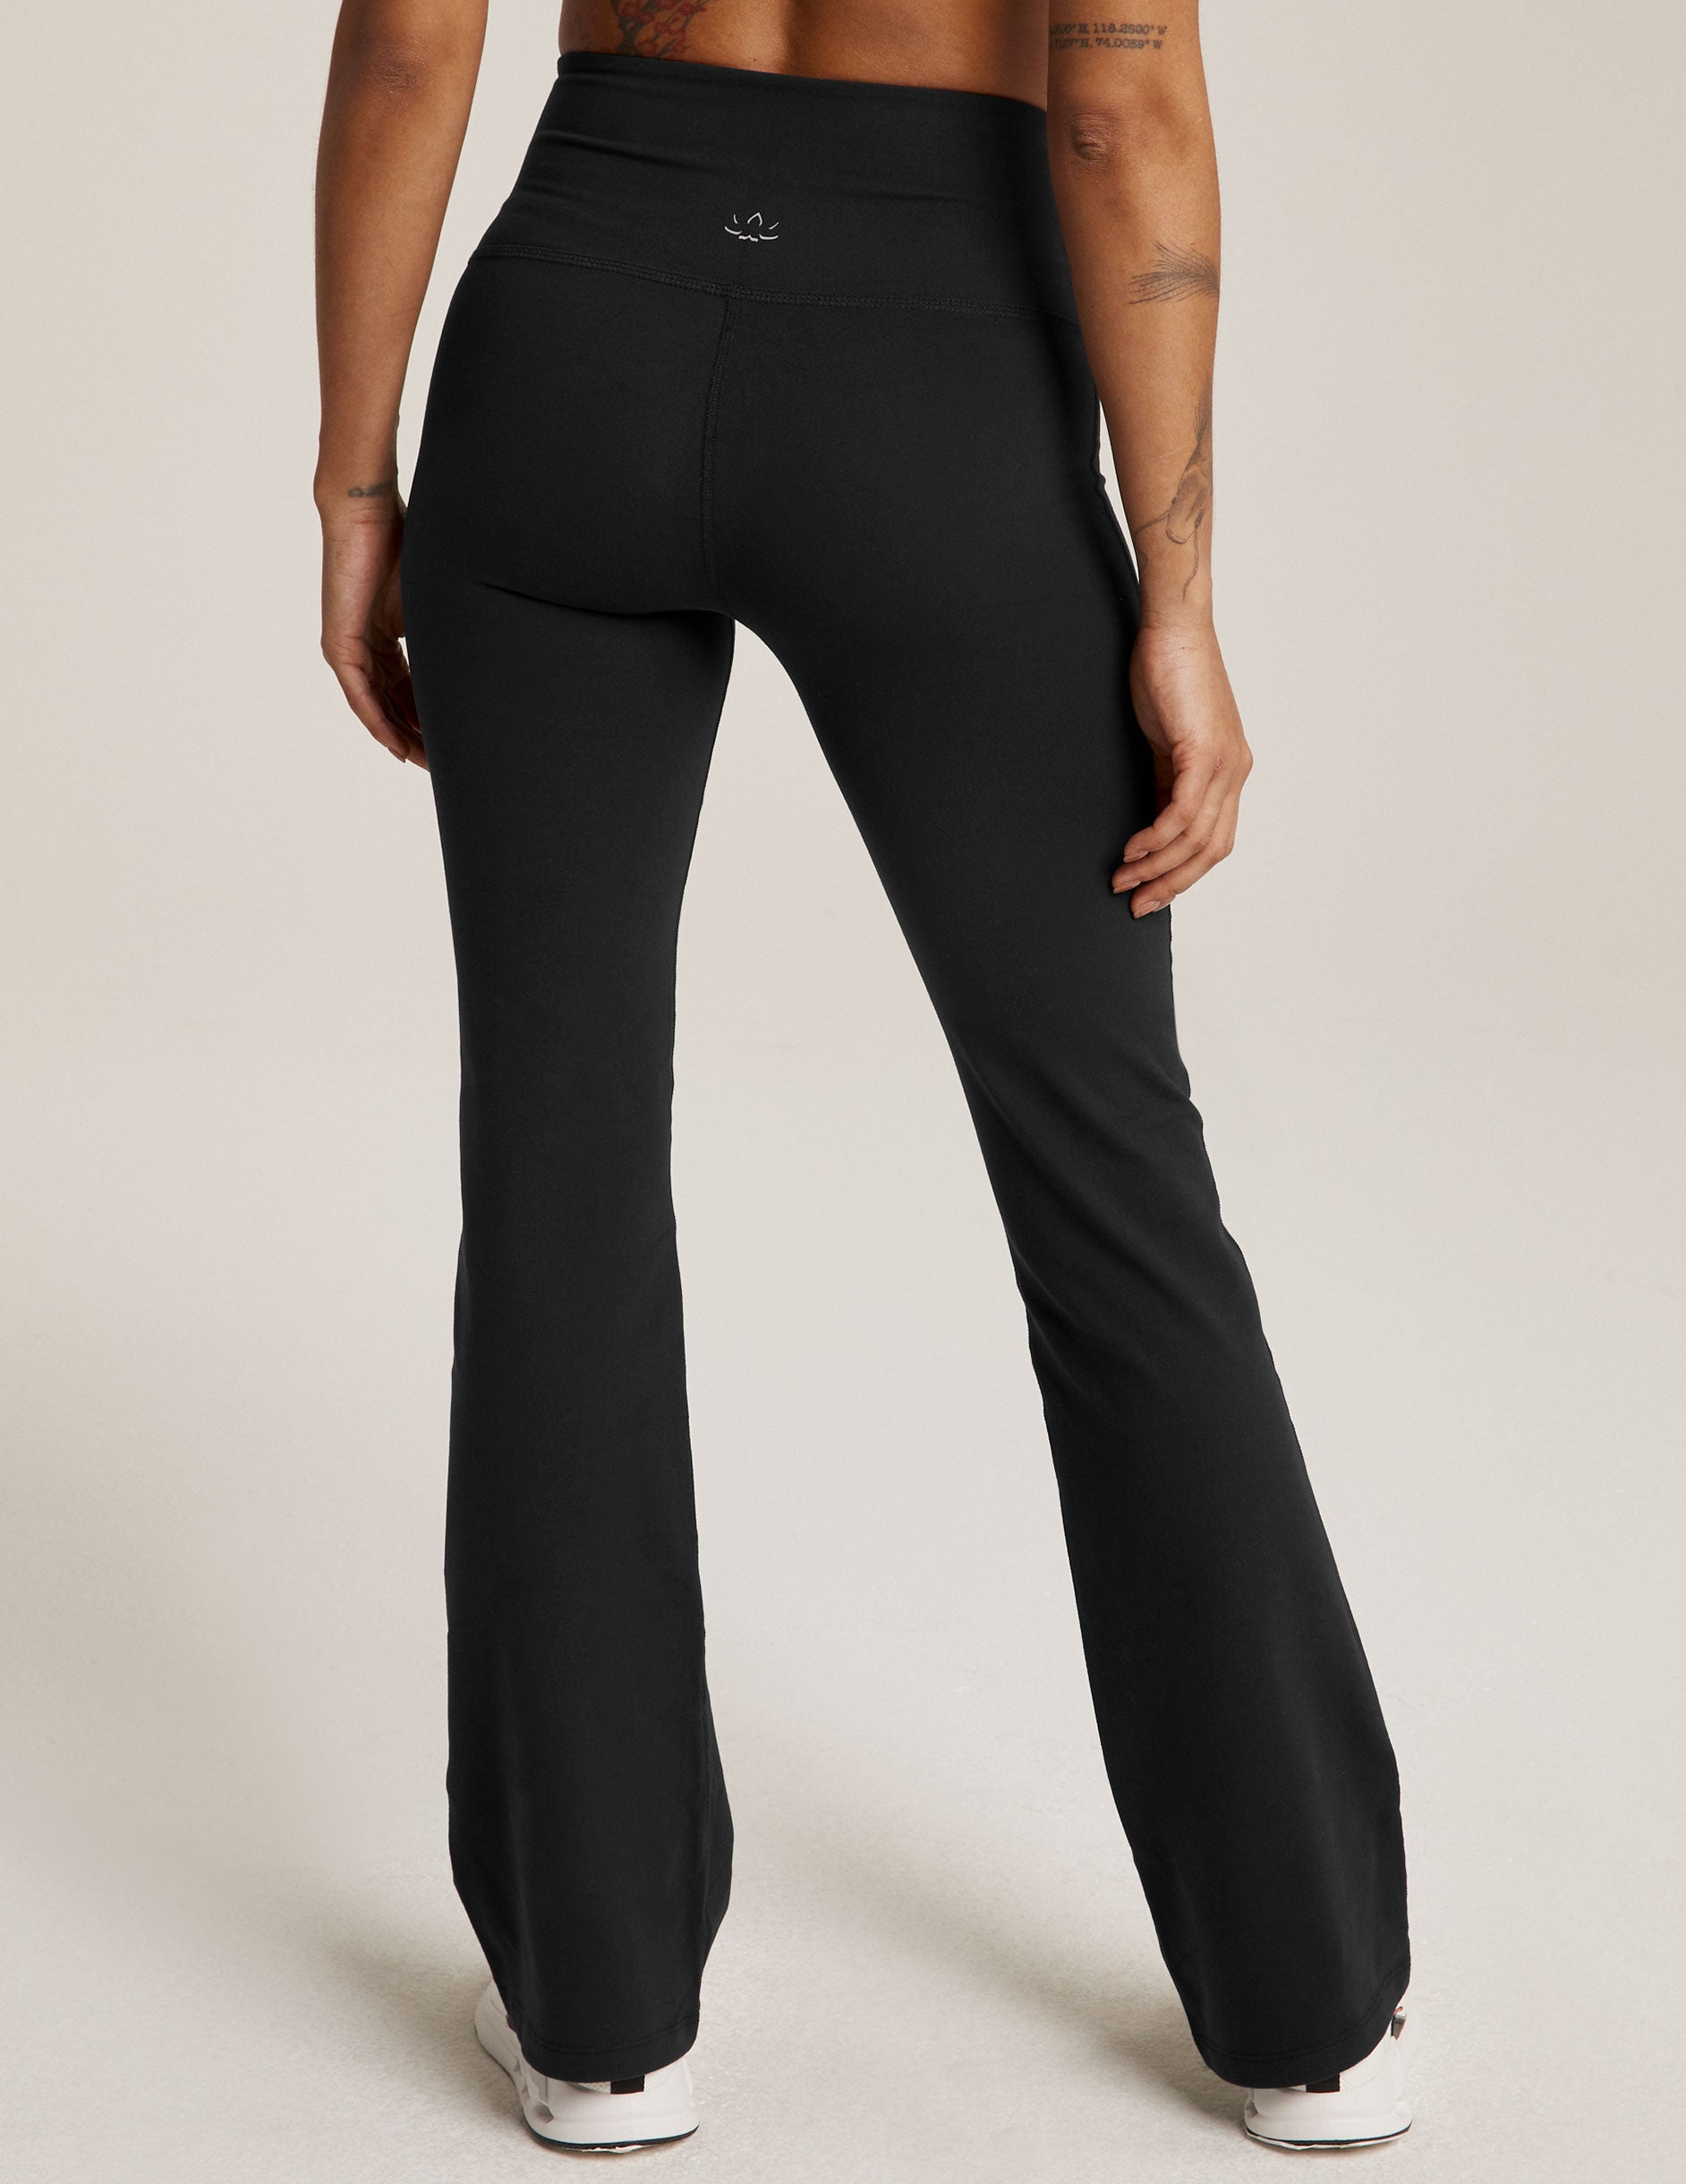 Beyond Yoga Moisture Wicking Athletic Pants for Women